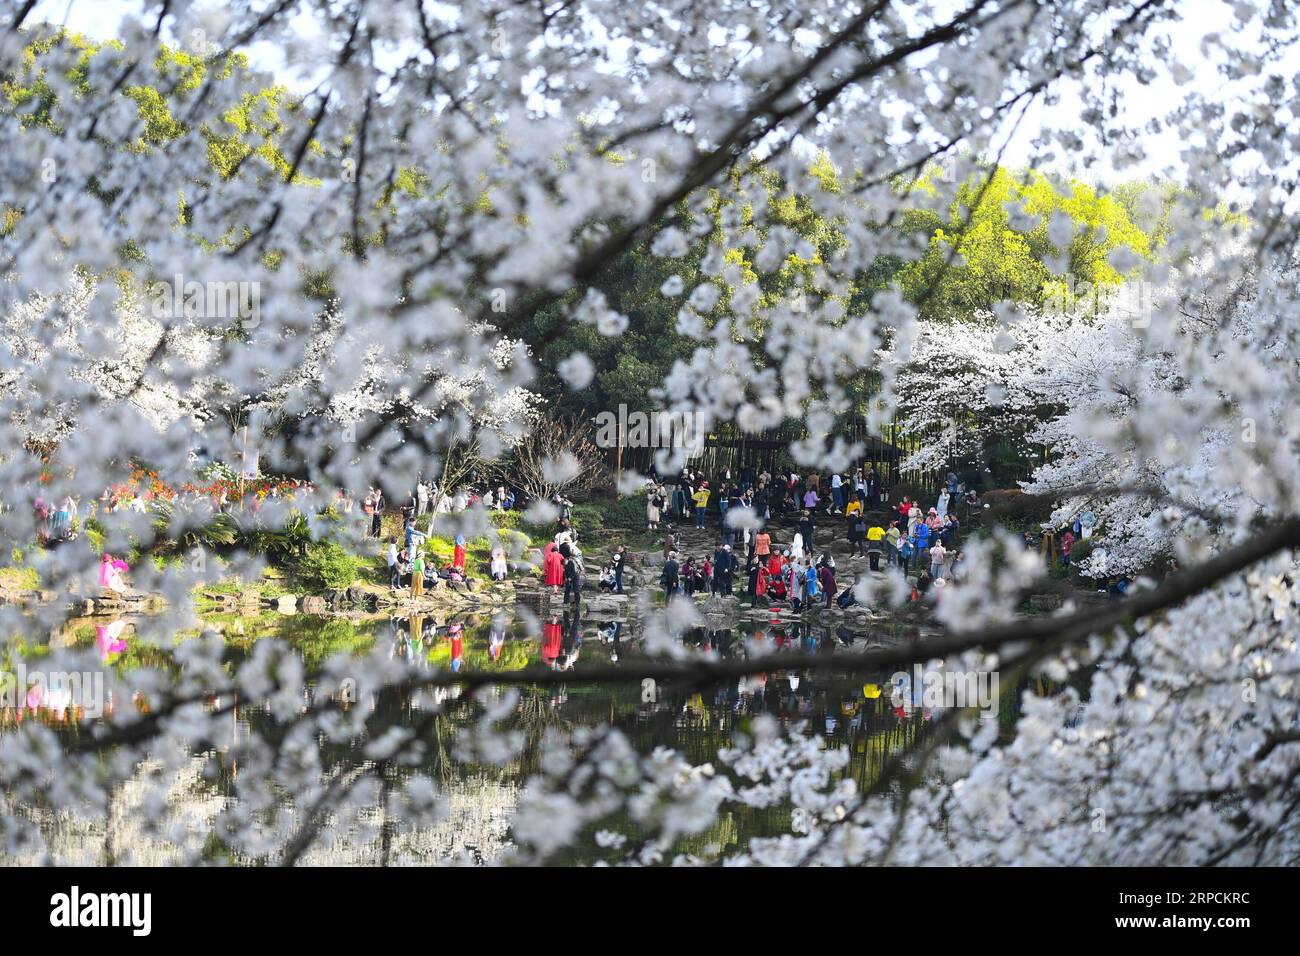 (190708) -- BEIJING, July 8, 2019 -- Tourists view cherry blossoms at the Hunan Forest Botanical Garden in Changsha, capital of central China s Hunan Province, March 25, 2019. Located in central China, Hunan Province is well-known for its varied topography. It abuts the Dongting Lake to the north, and the east, south and west sides of the province are surrounded by mountains, with Wuling and Xuefeng Mountains to the west, Nanling Mountain to the south, Luoxiao and Mufu Mountains to the east. The Xiangjiang, Zijiang, Yuanjiang and Lishui Rivers converge on the Yangtze River at the Dongting Lake Stock Photo